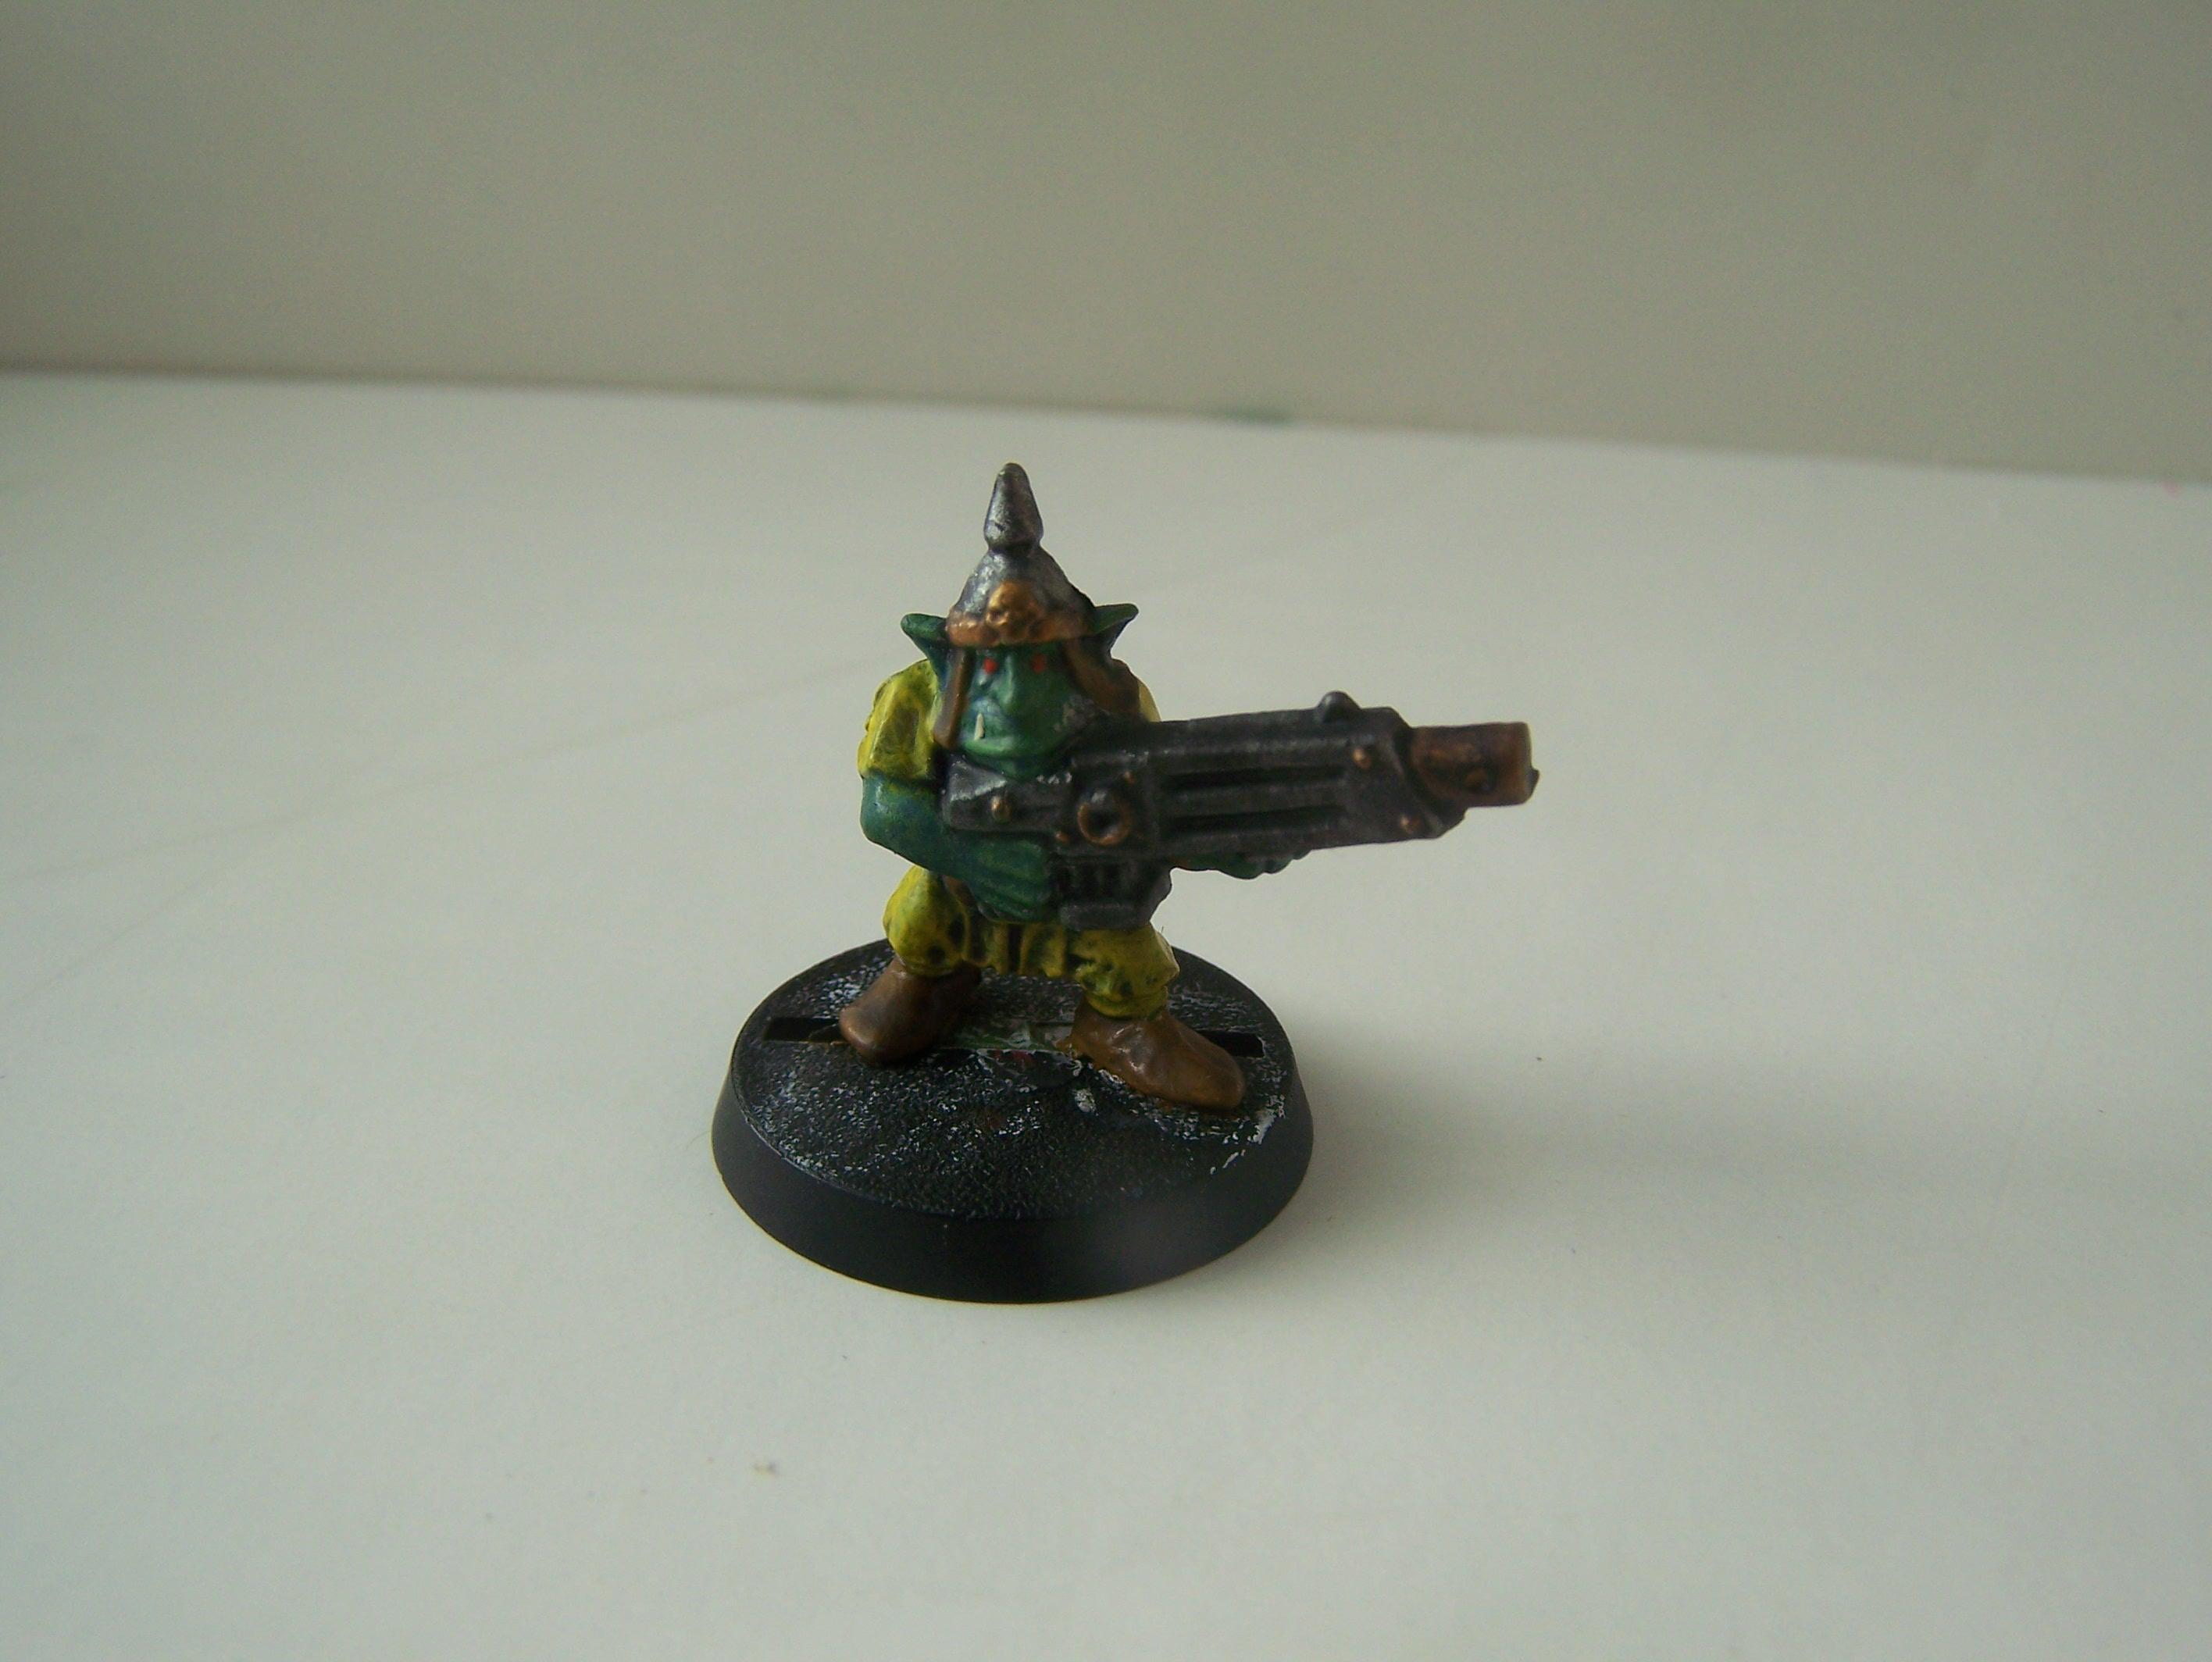 Anton's Badmoon Grot (still need to try and get a little more of a blue tint to the skin